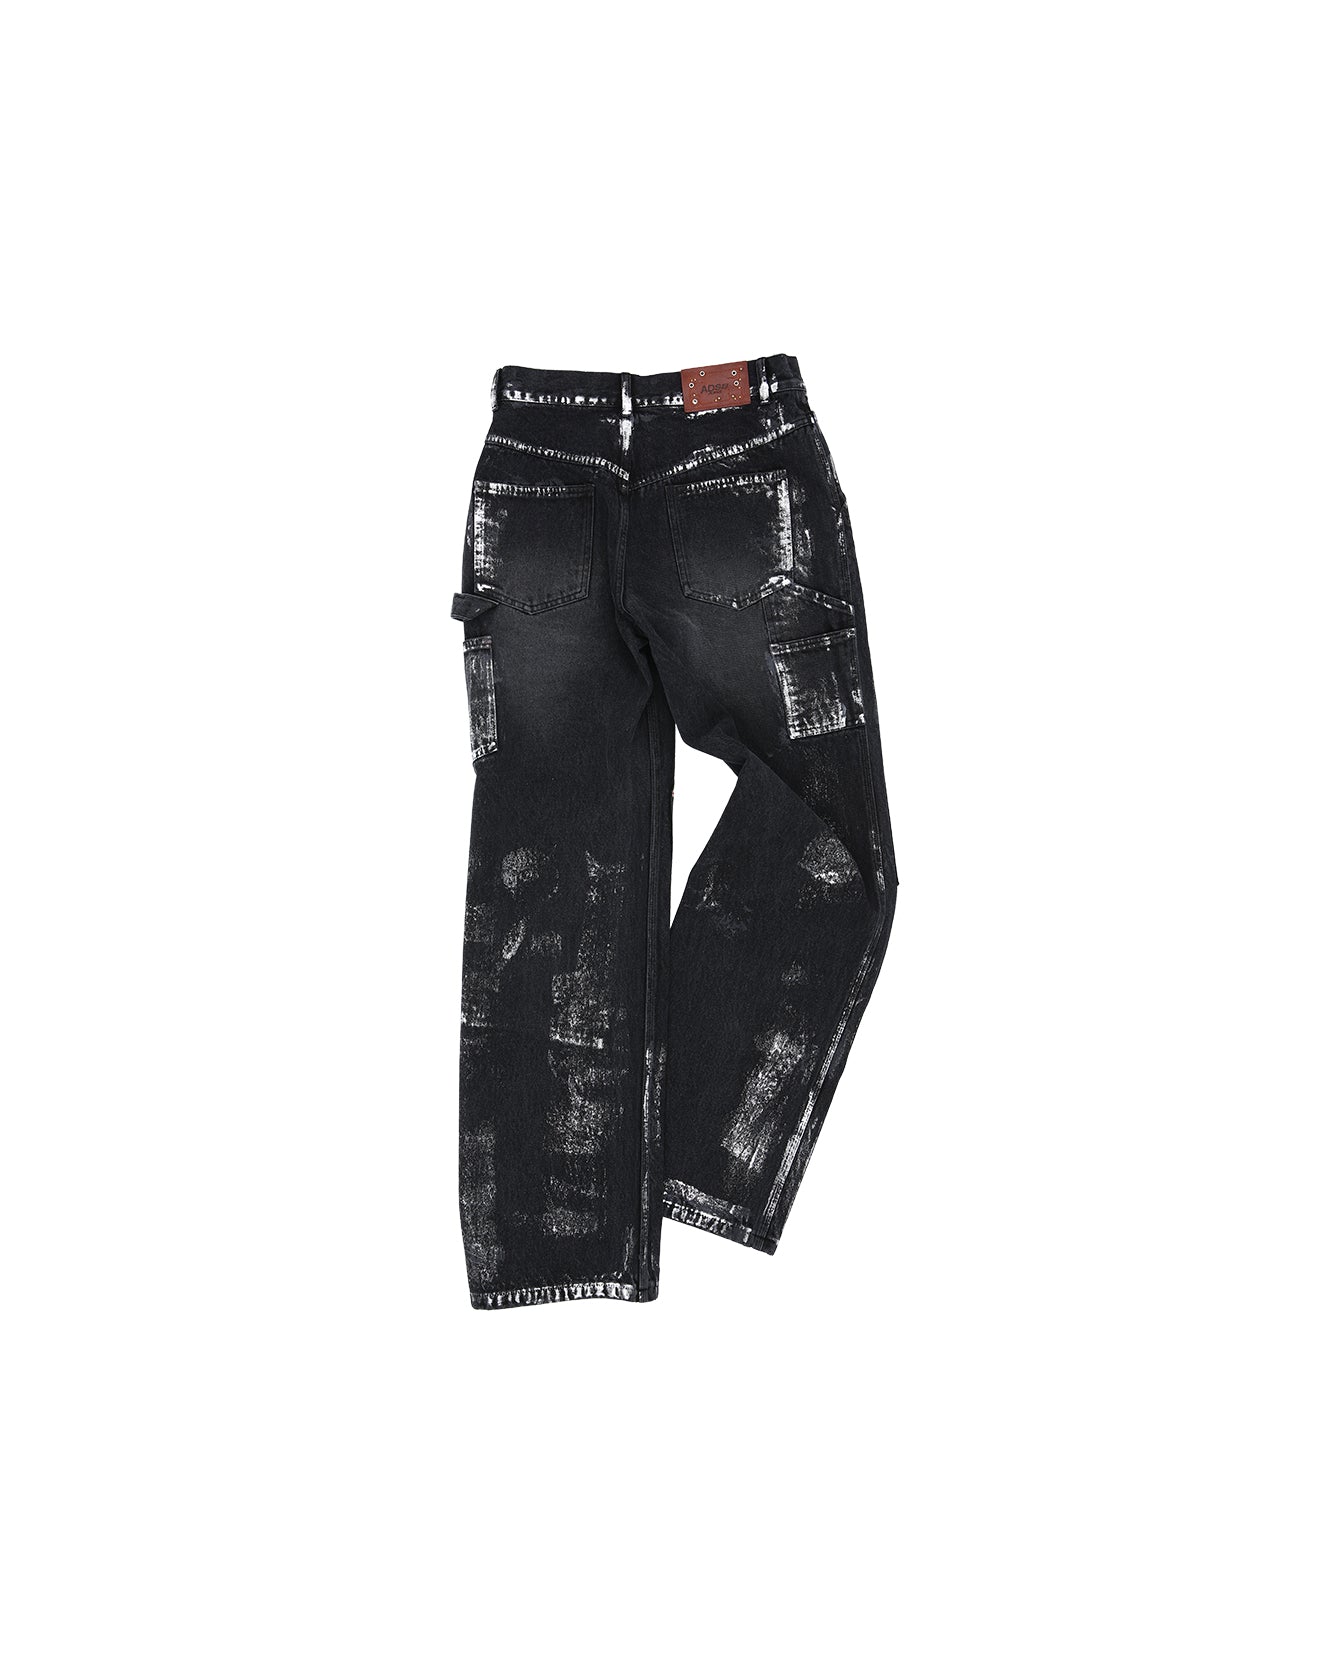 WAX COATED CARPENTER WIDE-LEG JEANS apa685m(BLACK) – Andersson Bell